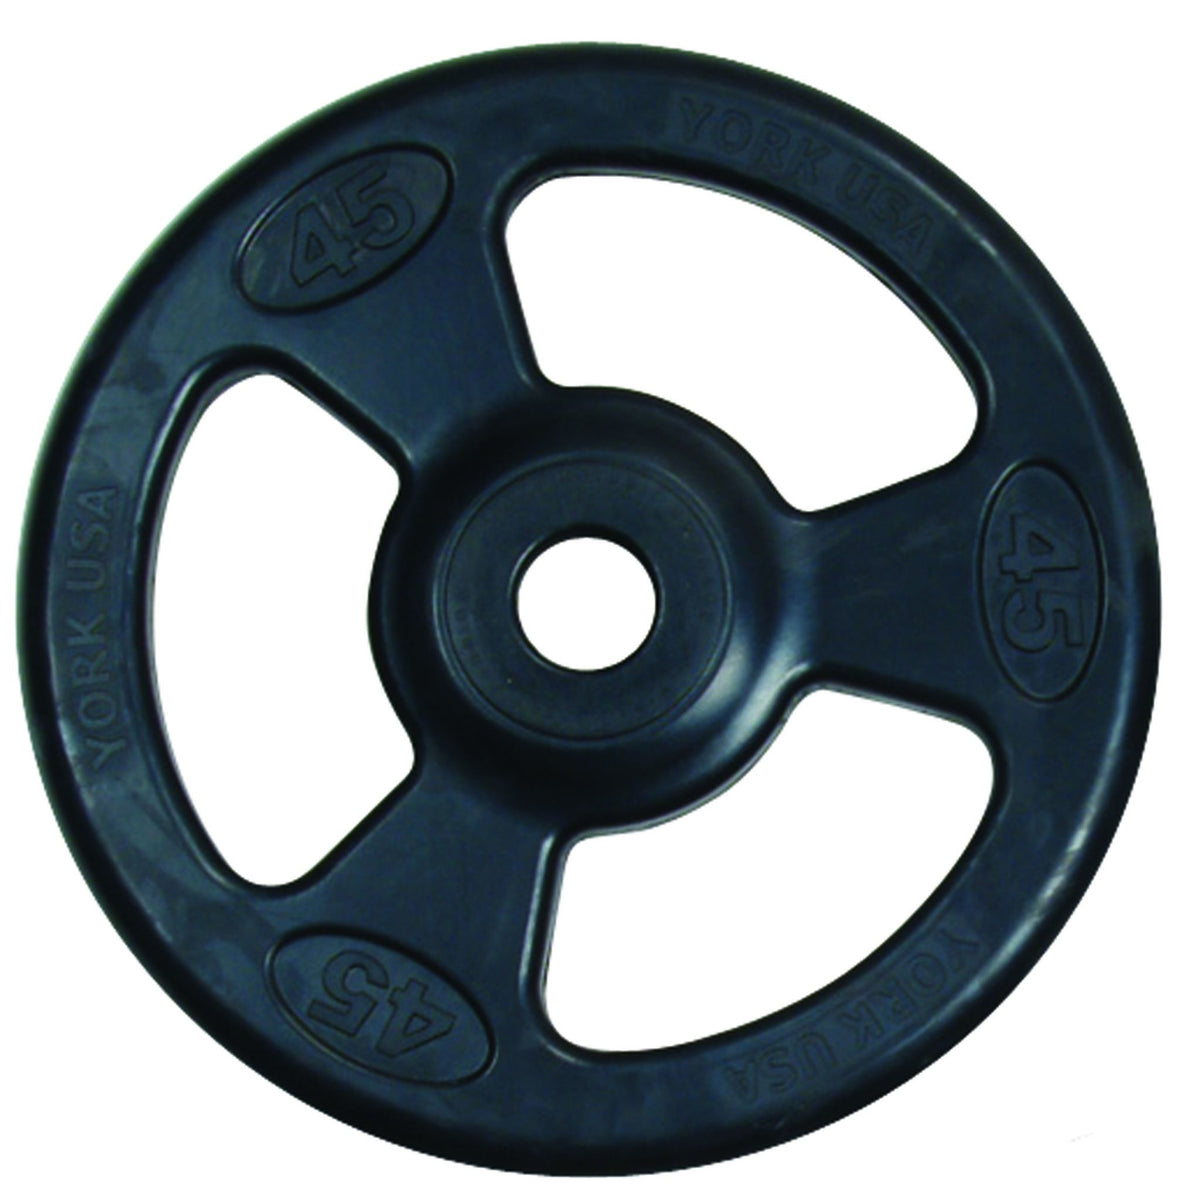 Rubber Encased Olympic ISO Grip Plate 2 inch